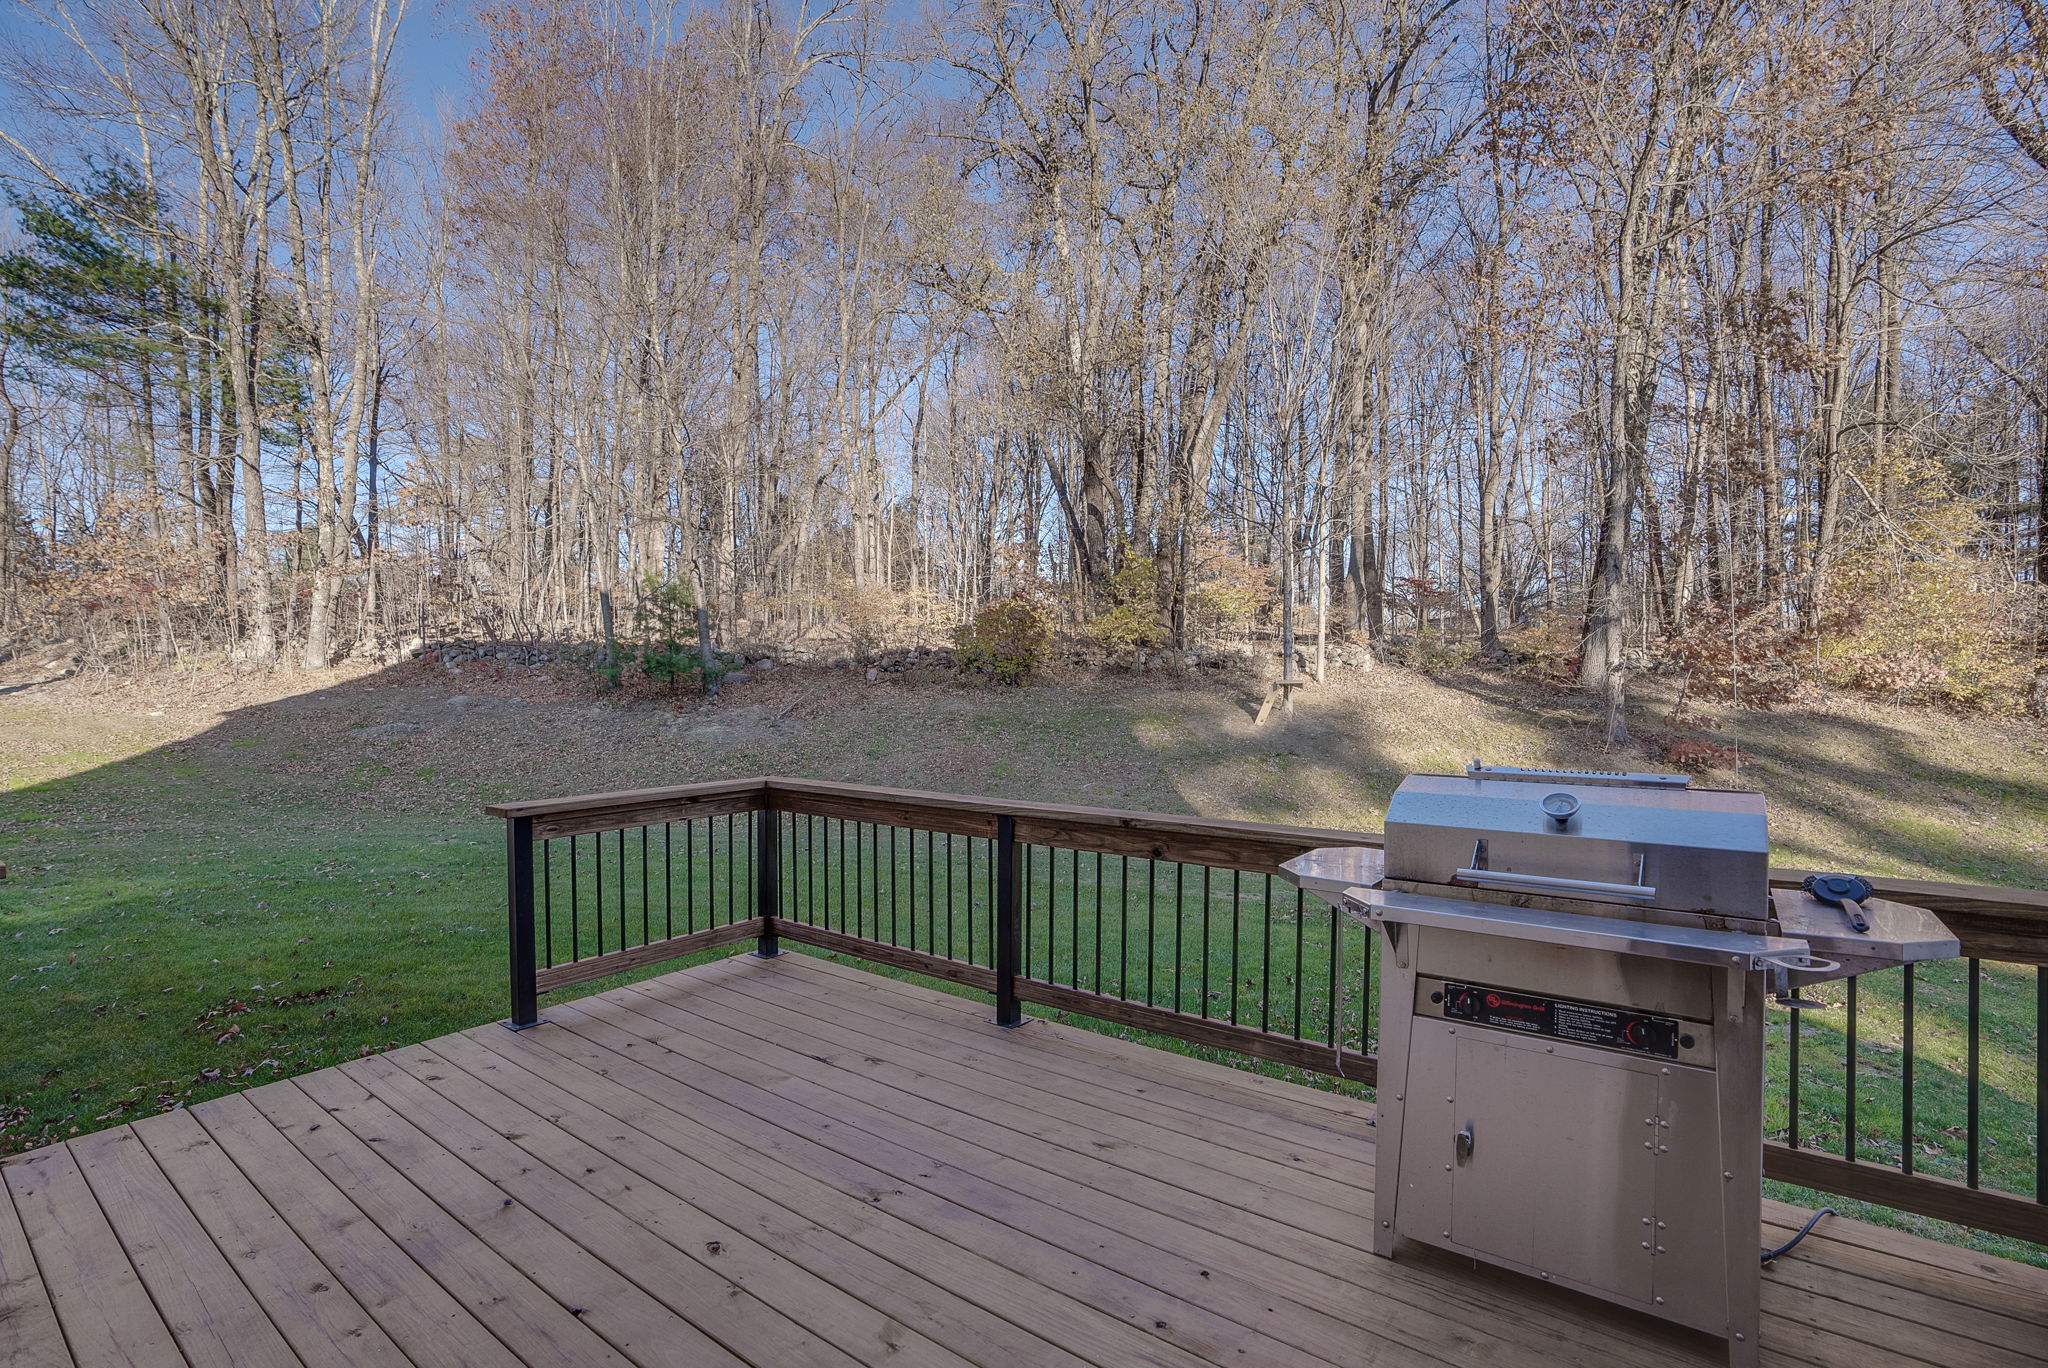 New rear deck with views of newly sodded yard and possible location for a pool or sports court